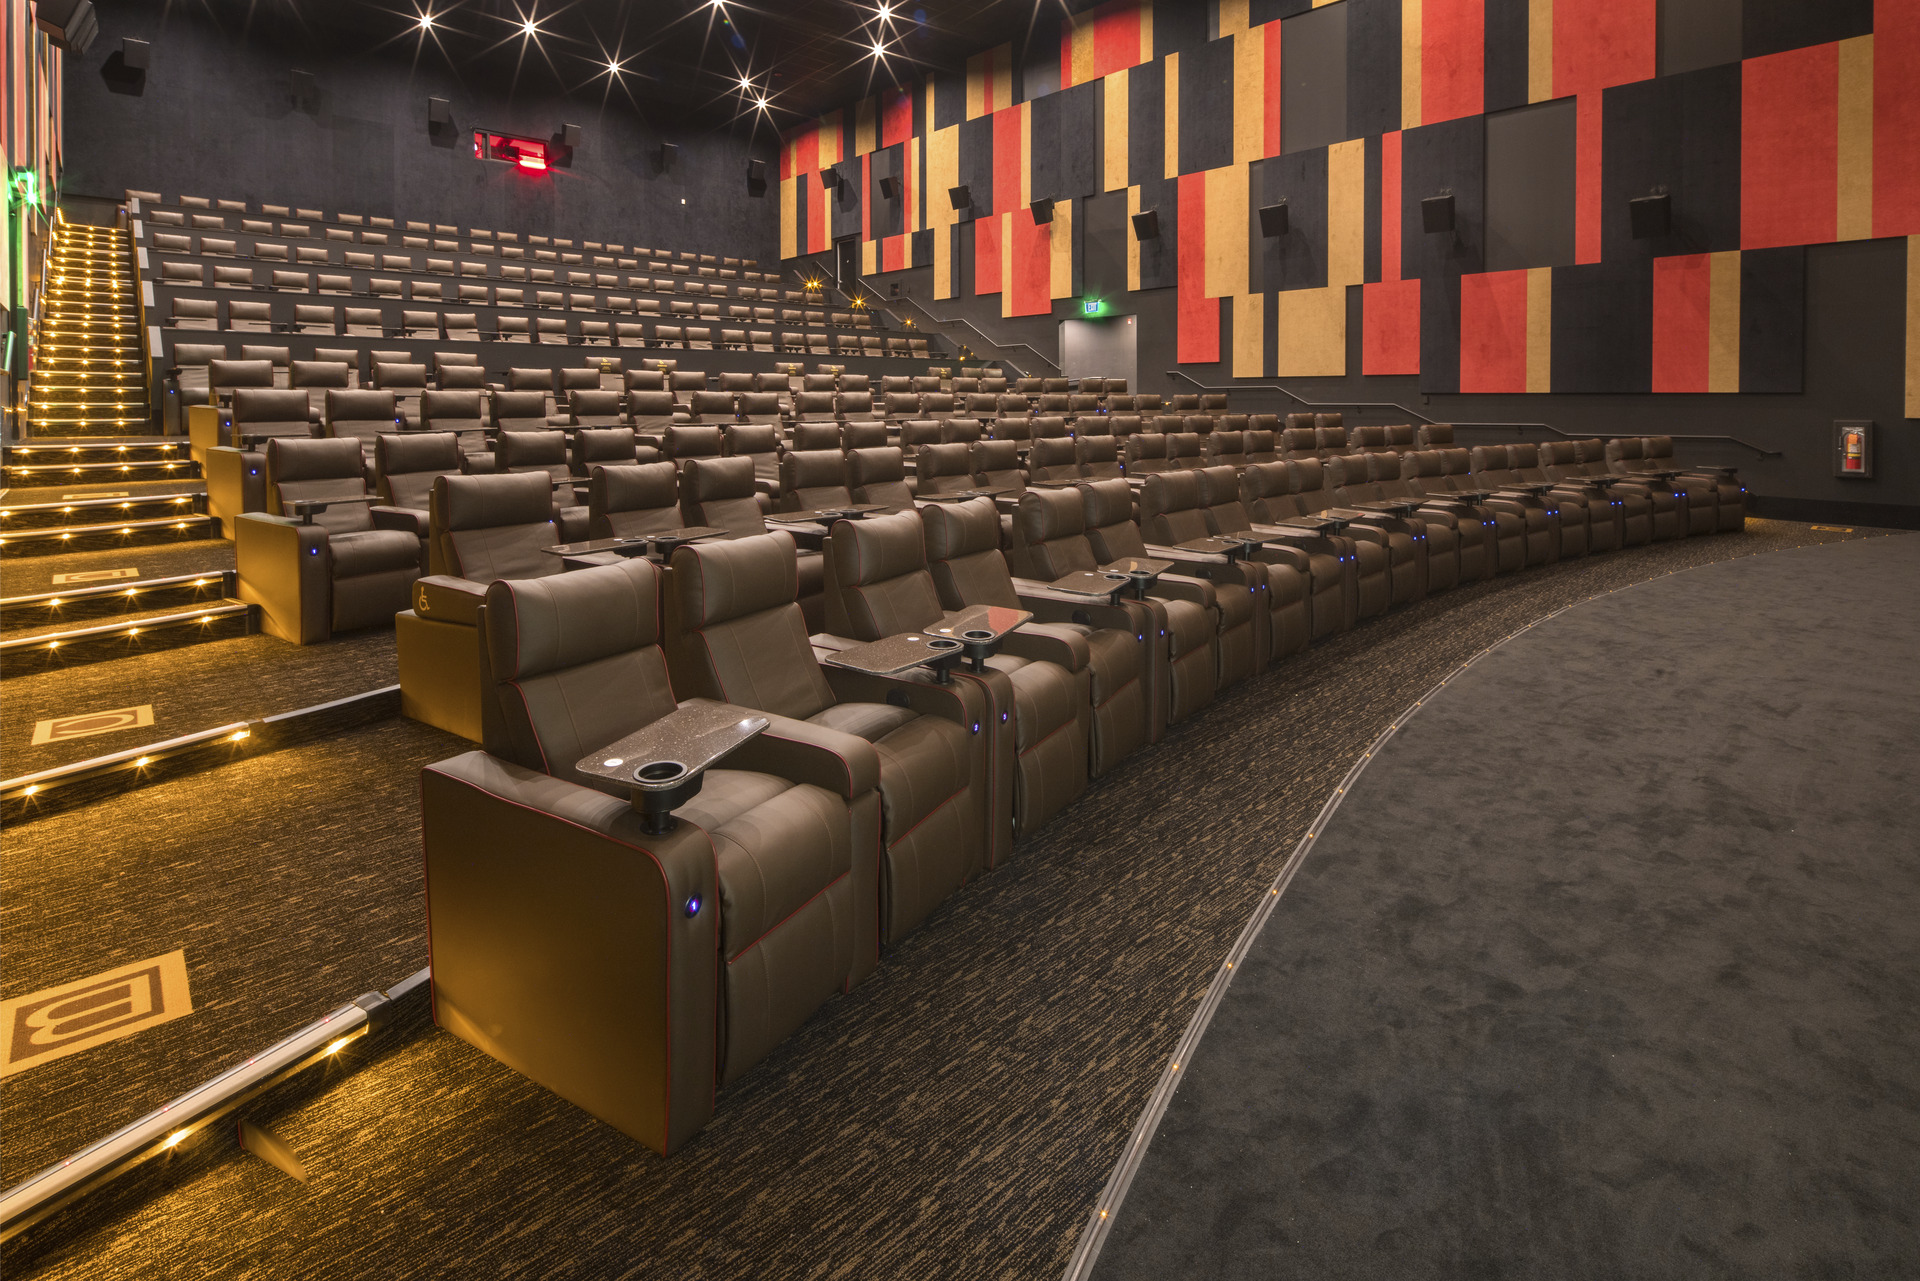 AMC Movie Theater Coming To Hackensack Mall This Fall